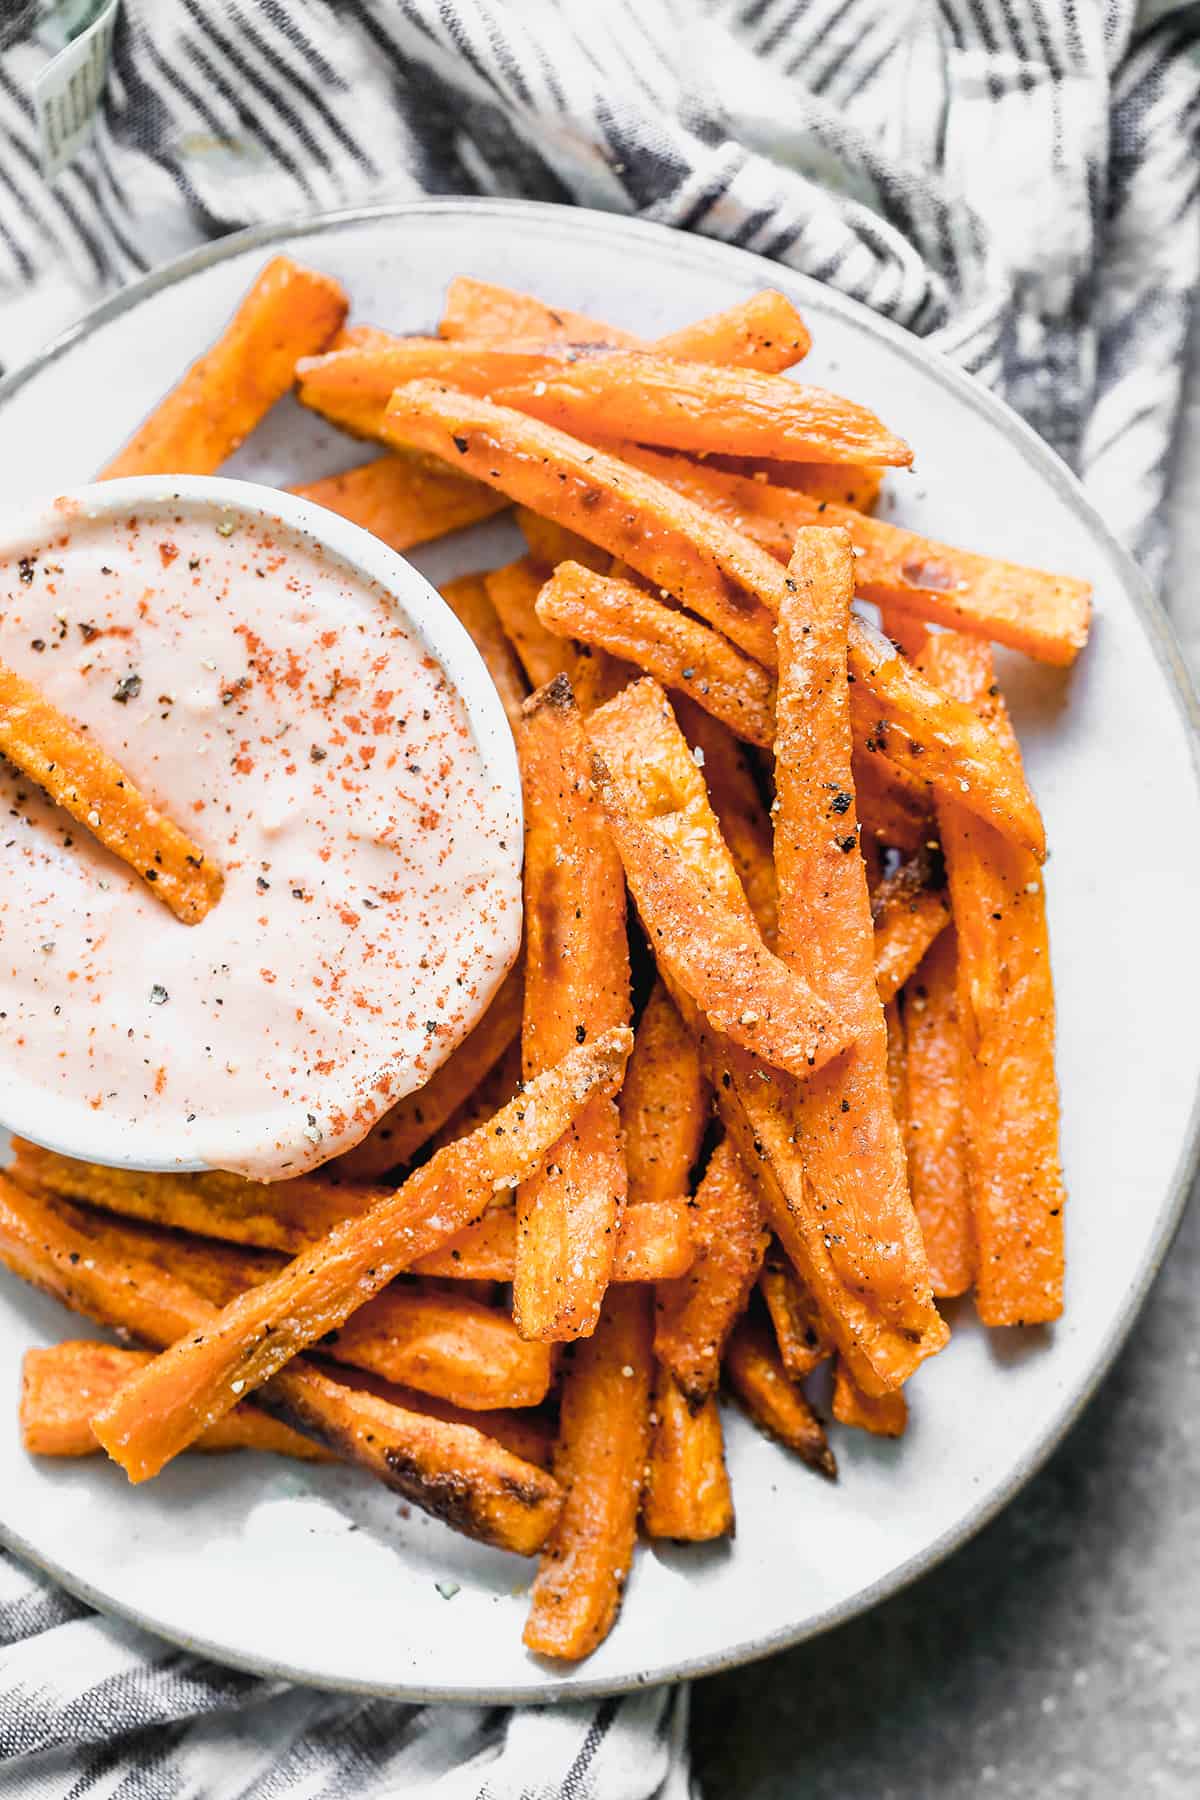 A plate of seasoned Sweet Potato fries with a cup of homemade fry sauce.